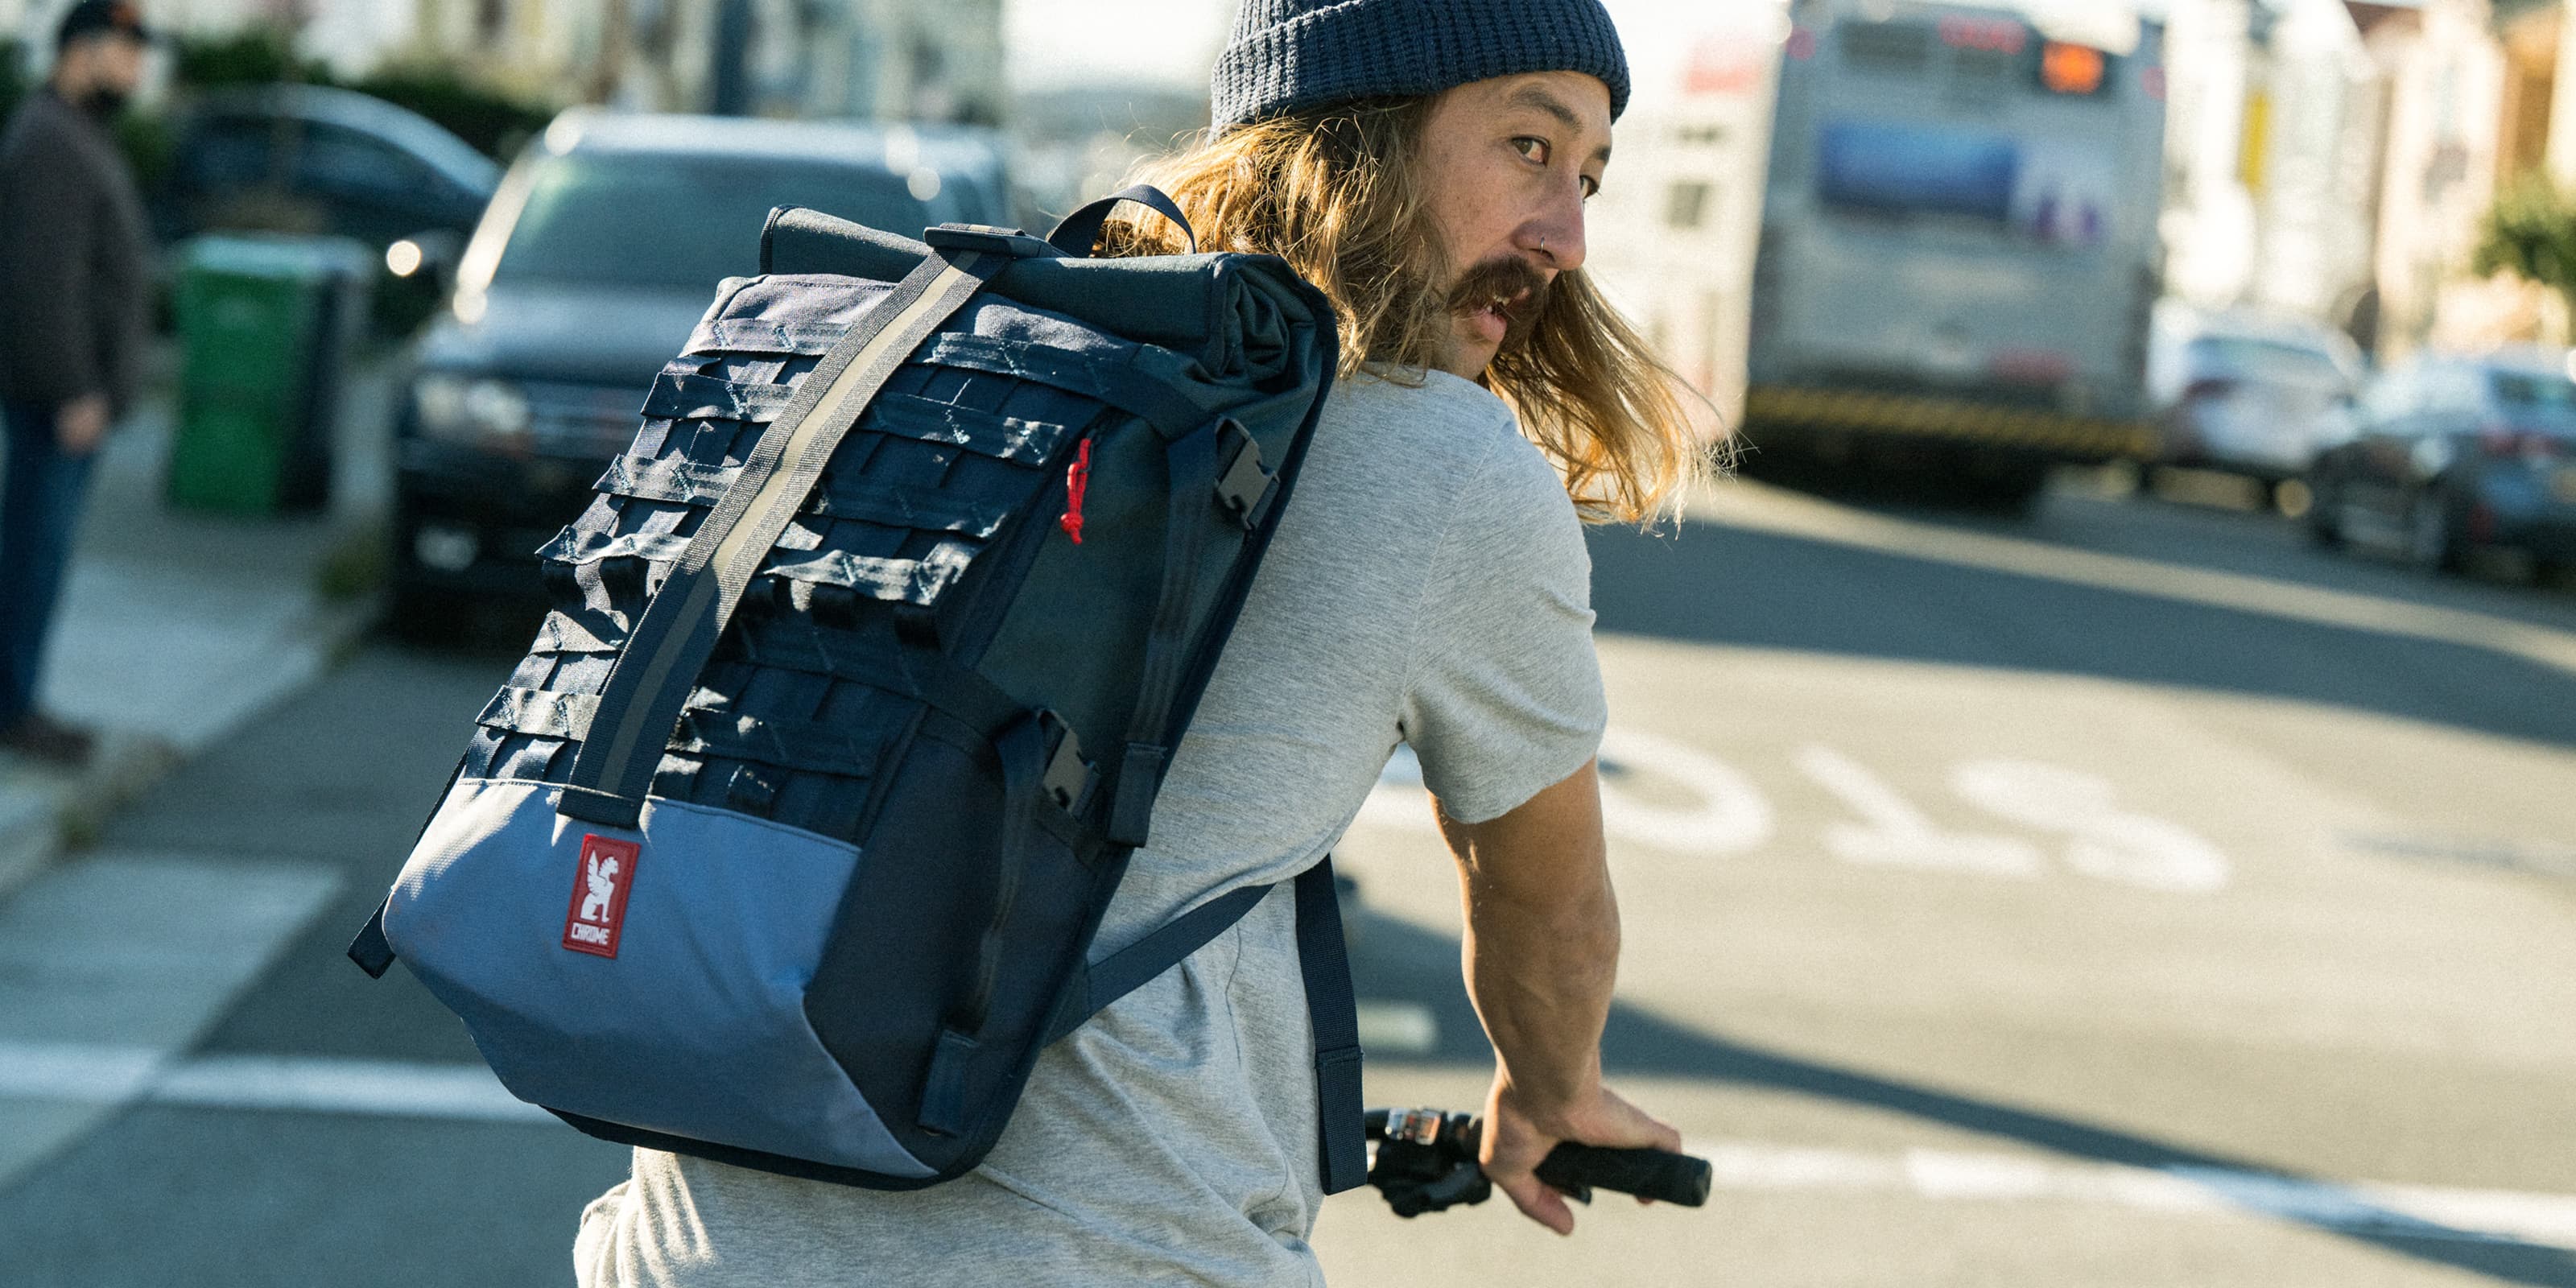 Water-resistant Barrage Cargo Backpack worn by a person cycling